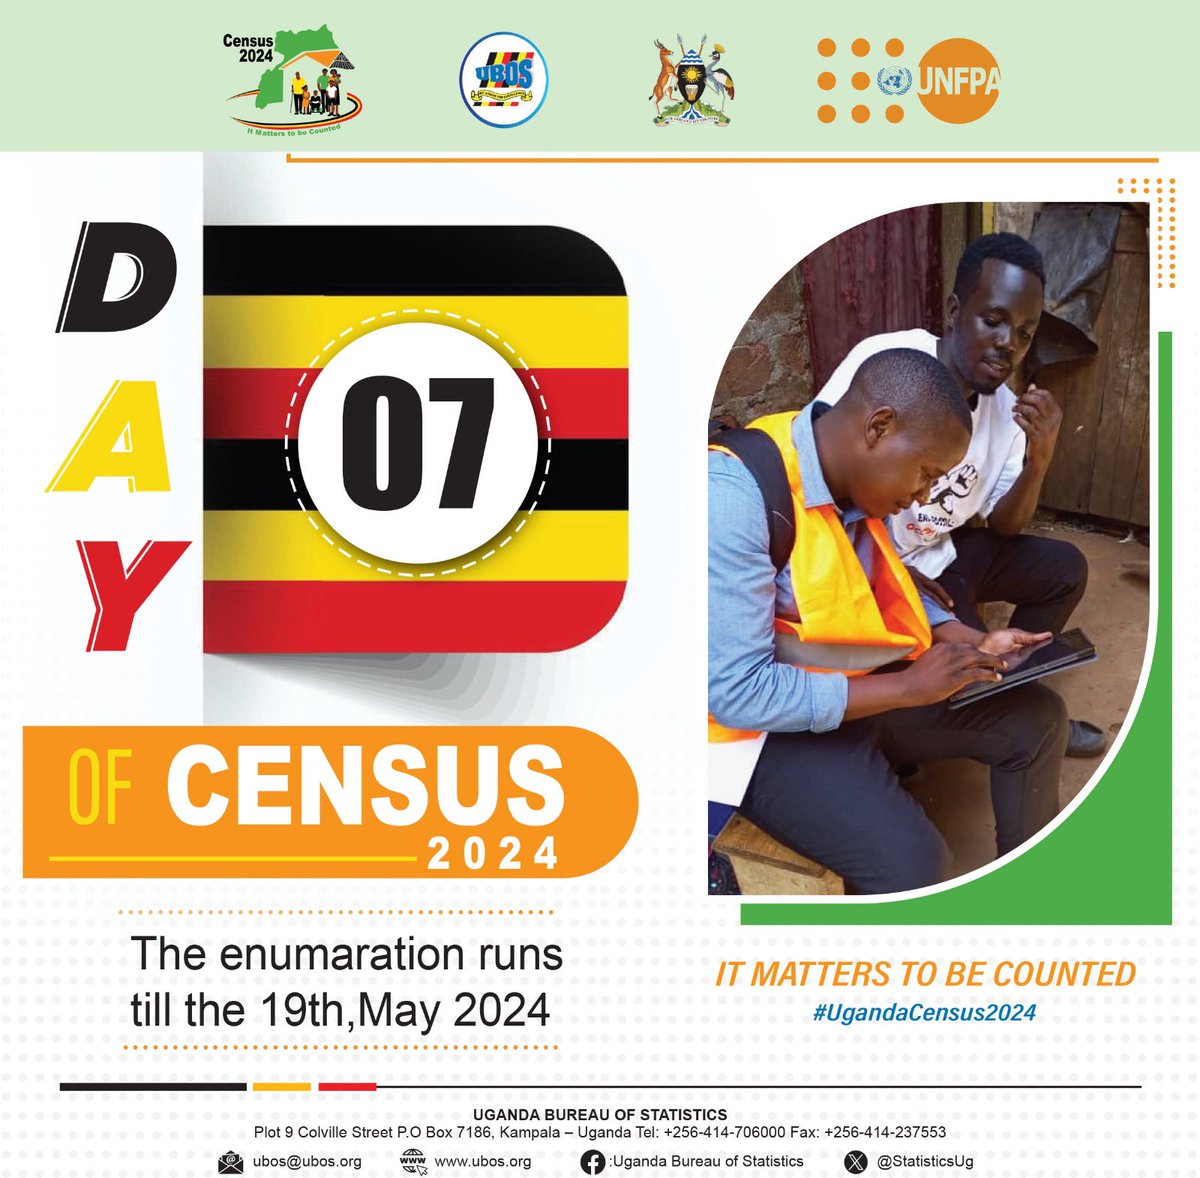 DAY 7🗓️ Make Your Voice Heard📣 It’s crucial that every Ugandan is counted. Remember, every single person matters, and every response makes a difference. By participating, you'll help. #UgandaCensus2024